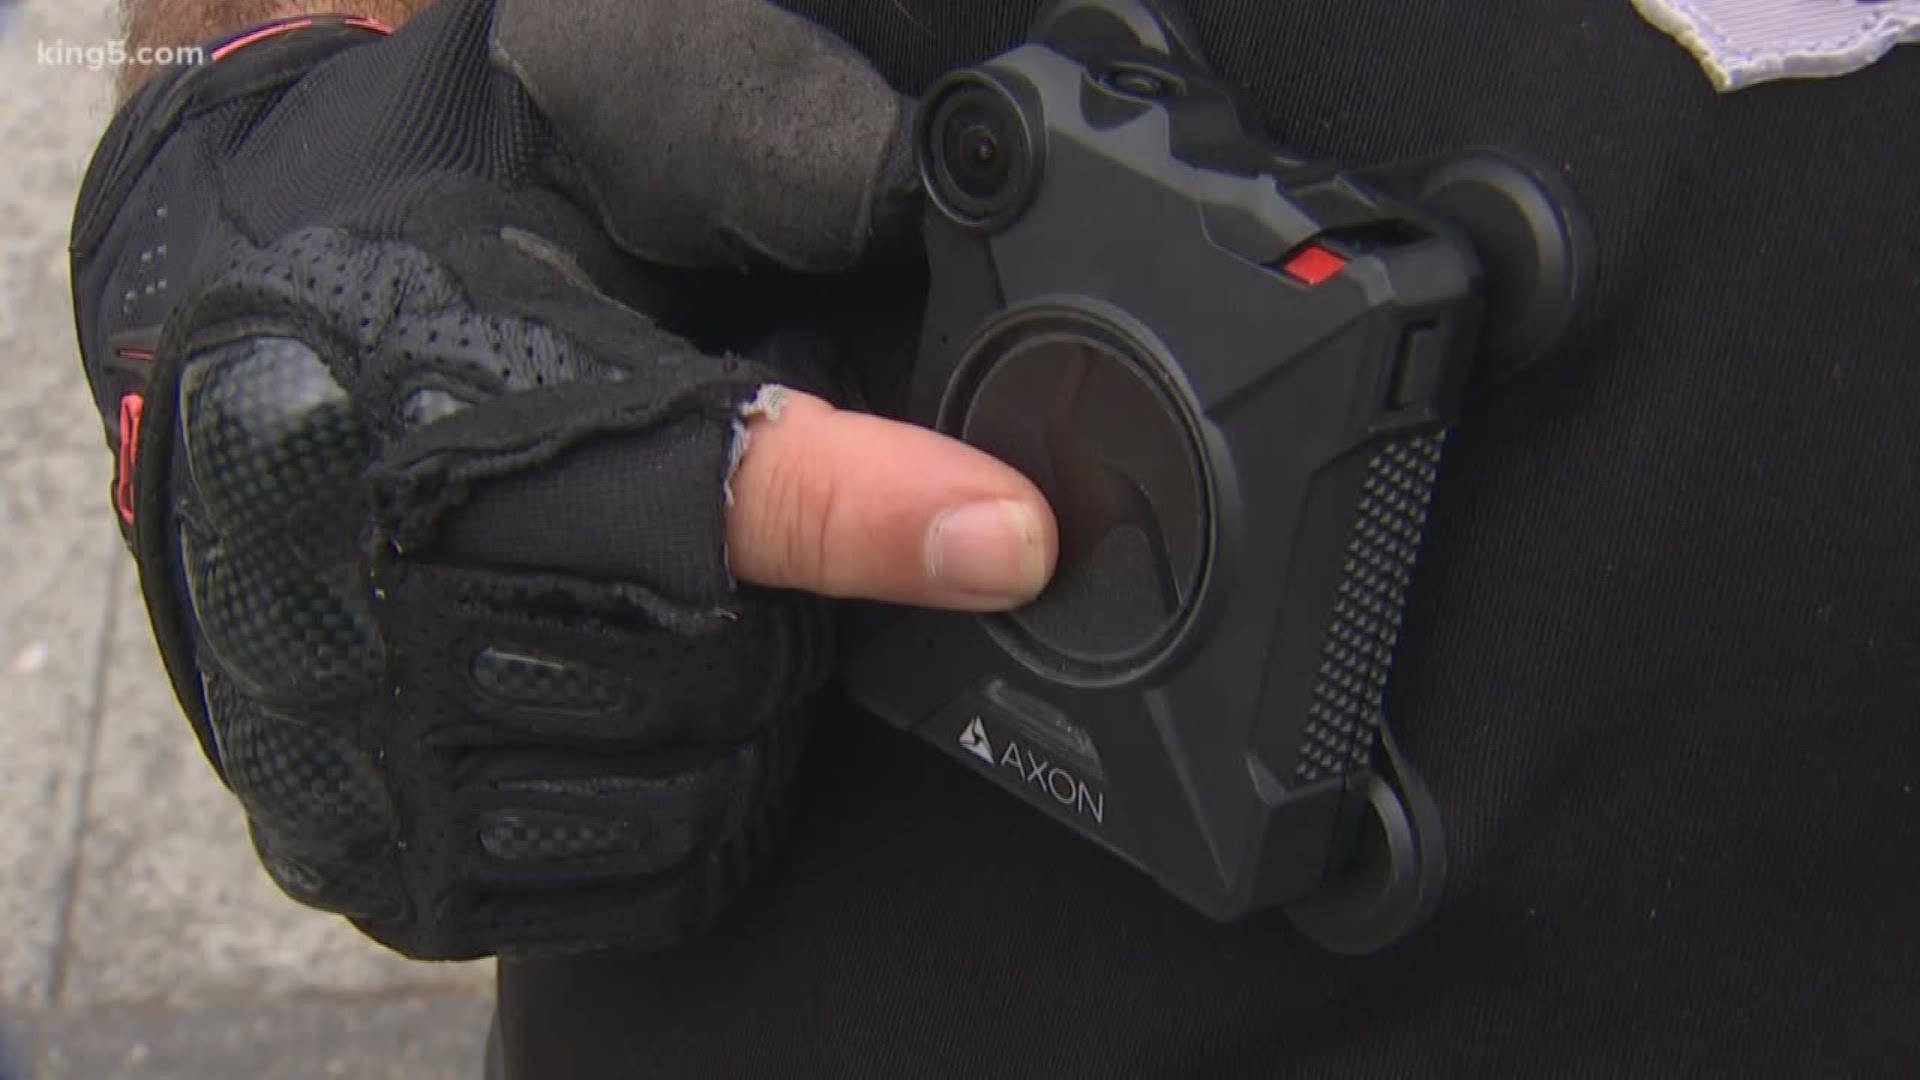 Everett Police are working to launch a department-wide body camera program. It will start with a trial period involving 10 to 50 officers. KING 5's Kalie Greenberg explains.